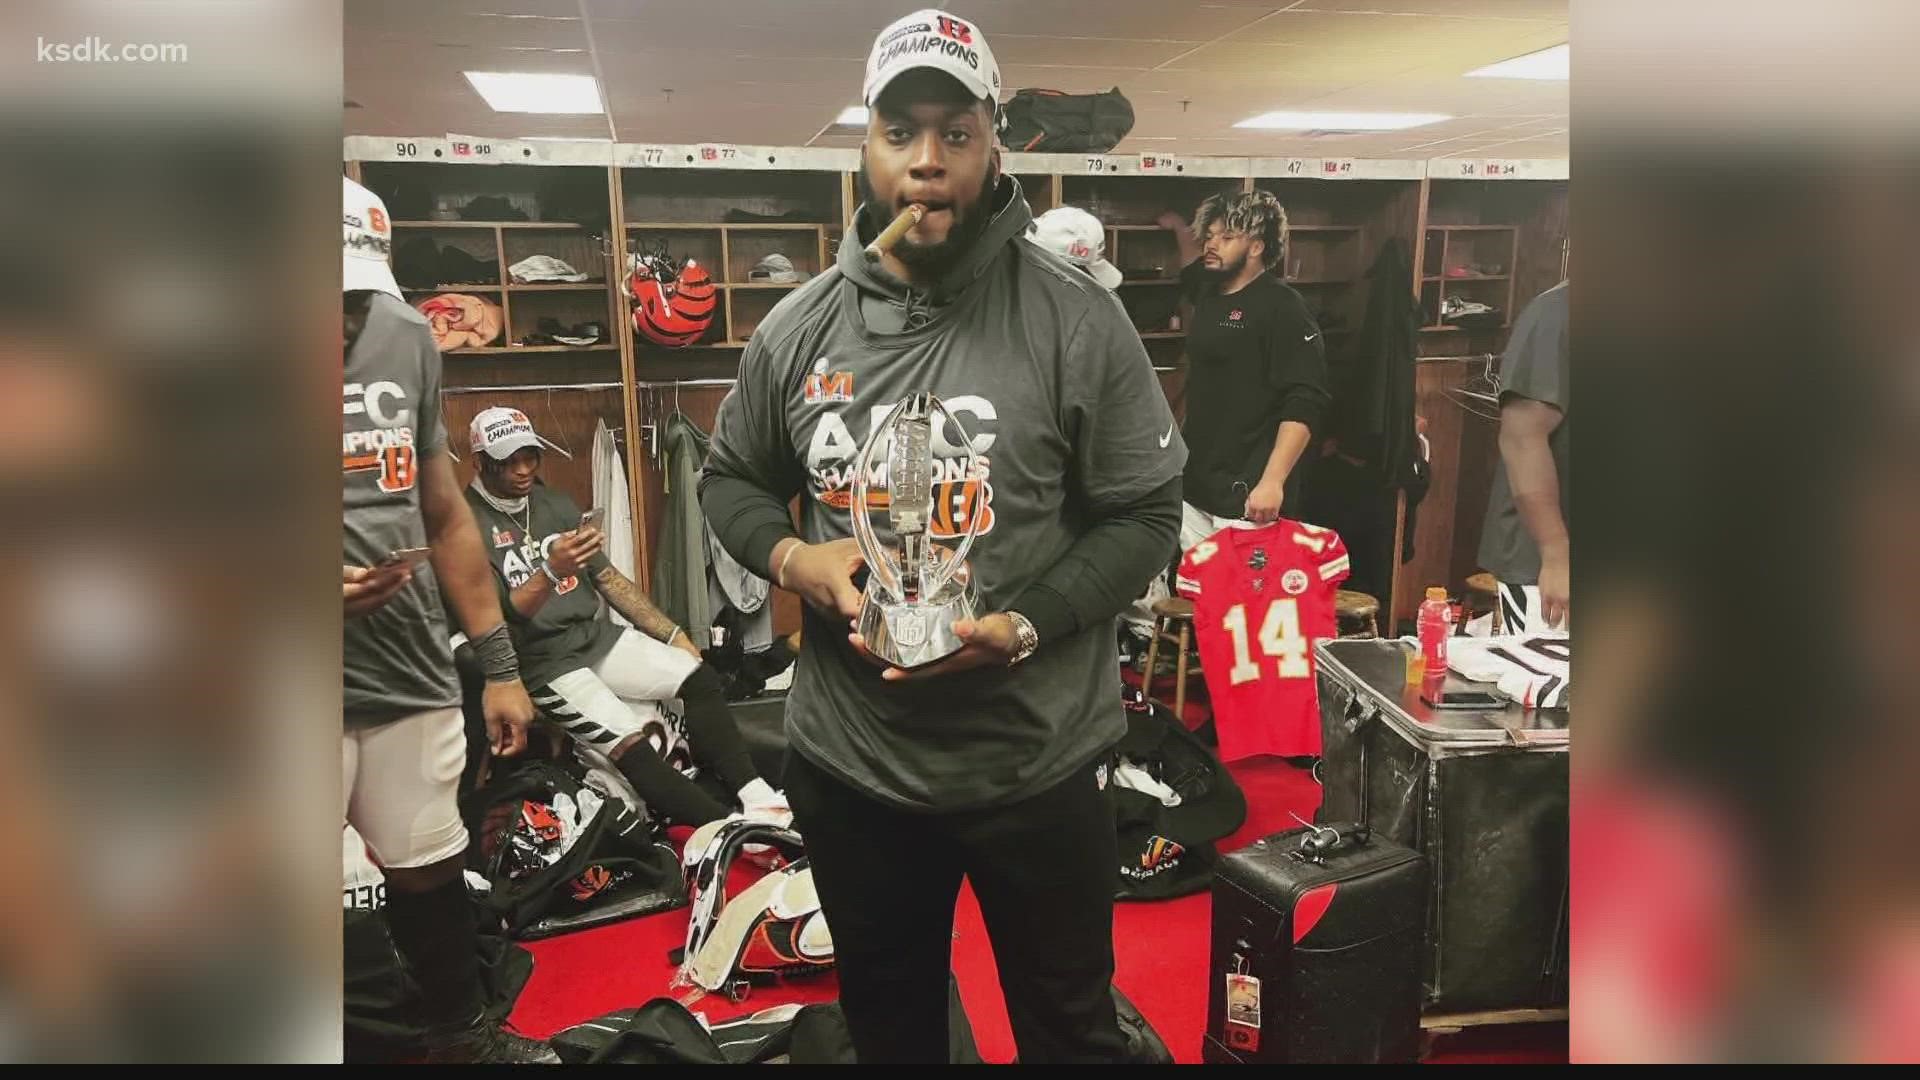 St. Louis has a hometown connection to root for in the Super Bowl against the Rams with Lutheran North grad and Bengals lineman Renell Wren.